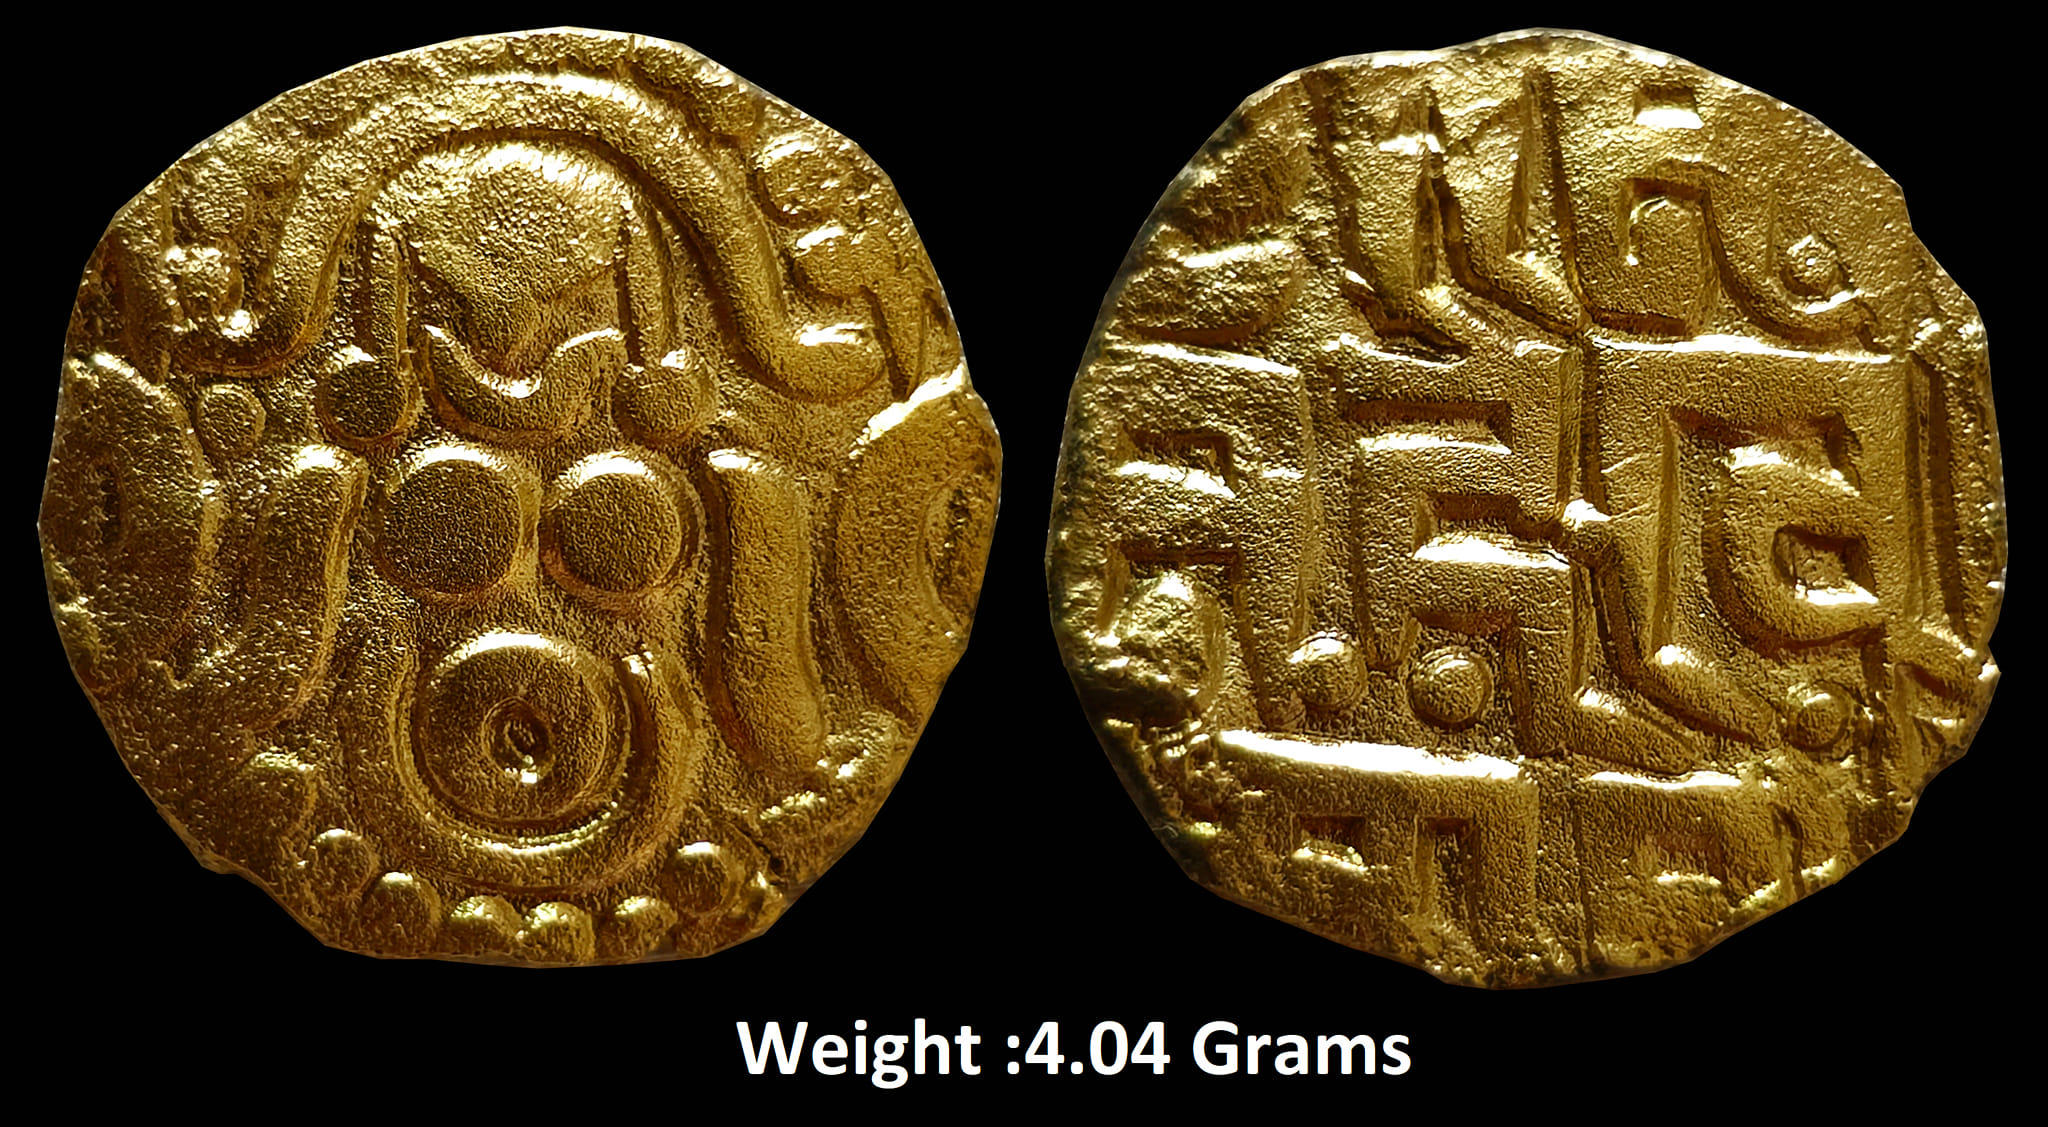 Delhi Sultanate
Muhammad bin Sam, ruled 1193-1206 AD
Base Gold (Approx 20 mm, 4.04 Grams )

Obverse: Goddess Lakshmi seated
Reverse: Devanagari legend in 3 lines Sri Maha/mad bini/ Sam
Mint: Kanauj
Ref: Stan Goron & J.P. Goenka, The Coins of the Indian Sultanates, D5

Muhammad bin Sam was the Afghan invader who established the first Muslim kingdom at Delhi. He copied the Lakshmi type gold coins of the Hindu kings he defeated. He replaced their name with his own name on reverse, keeping the Devanagari legend so it could be read by the native population.

This is an important marker in the increasing control of the fledgling Delhi Sultanate and its use of coinage as a propaganda tool. The Muslim sultan probably just continued with the existing mints of the Rajputs, merely changing the name on the coins.

An attractive specimen with the complete legend on reverse.